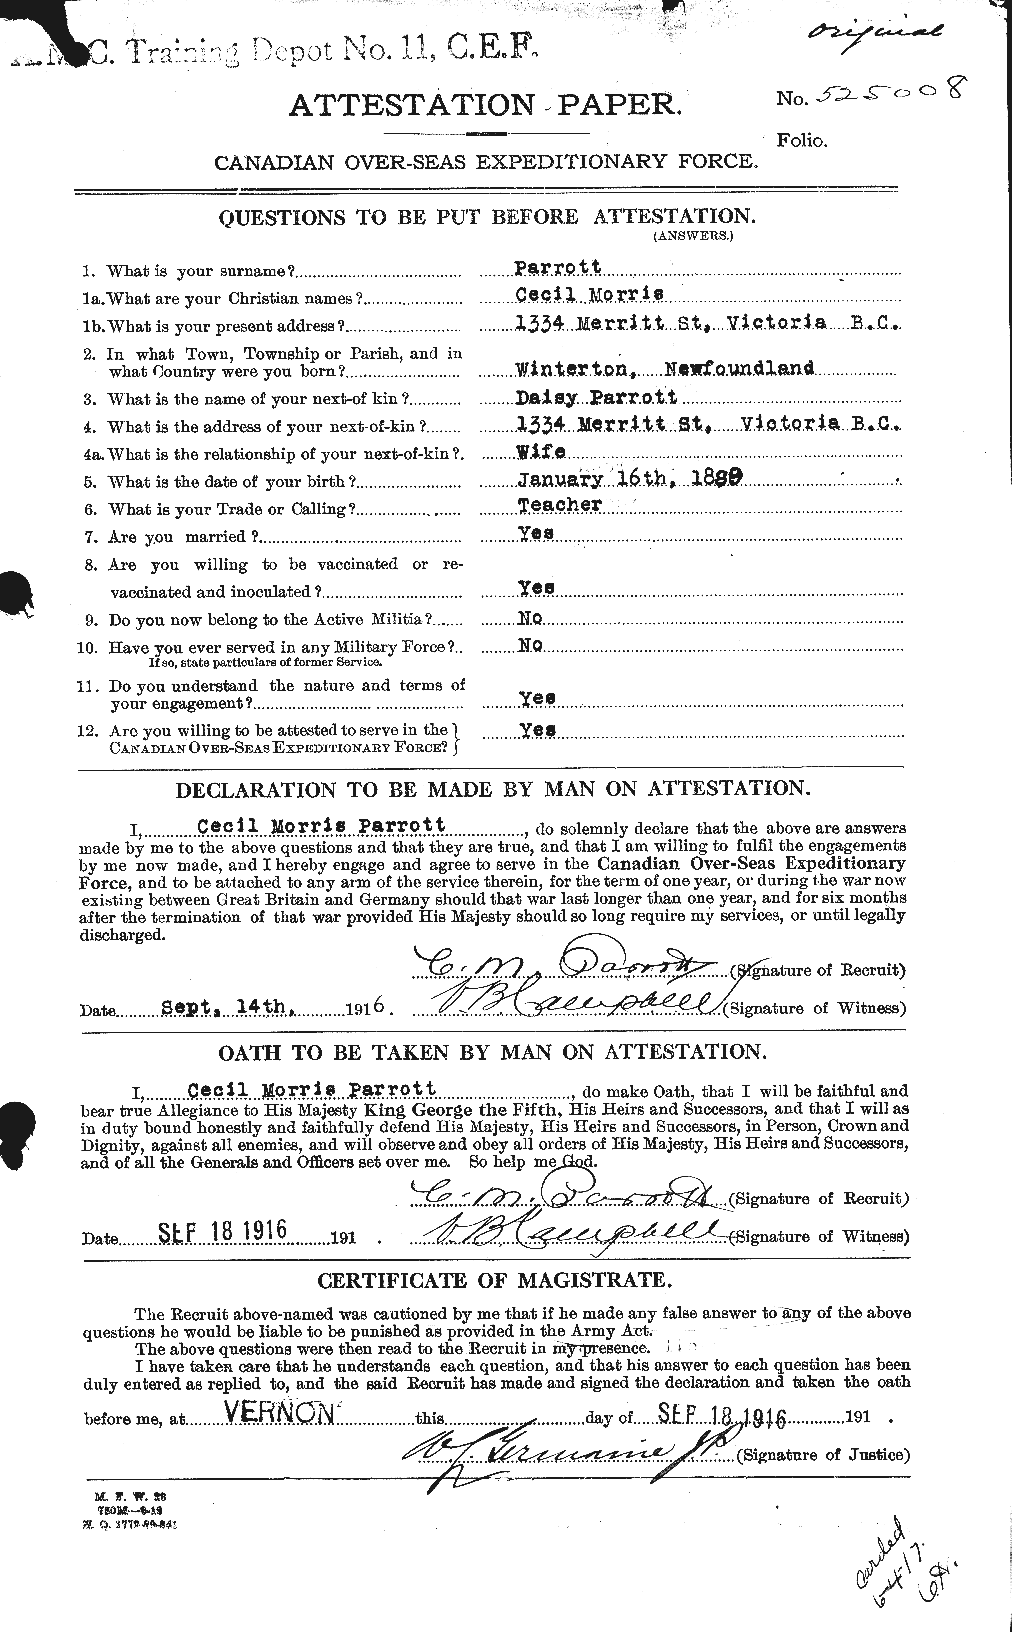 Personnel Records of the First World War - CEF 566550a